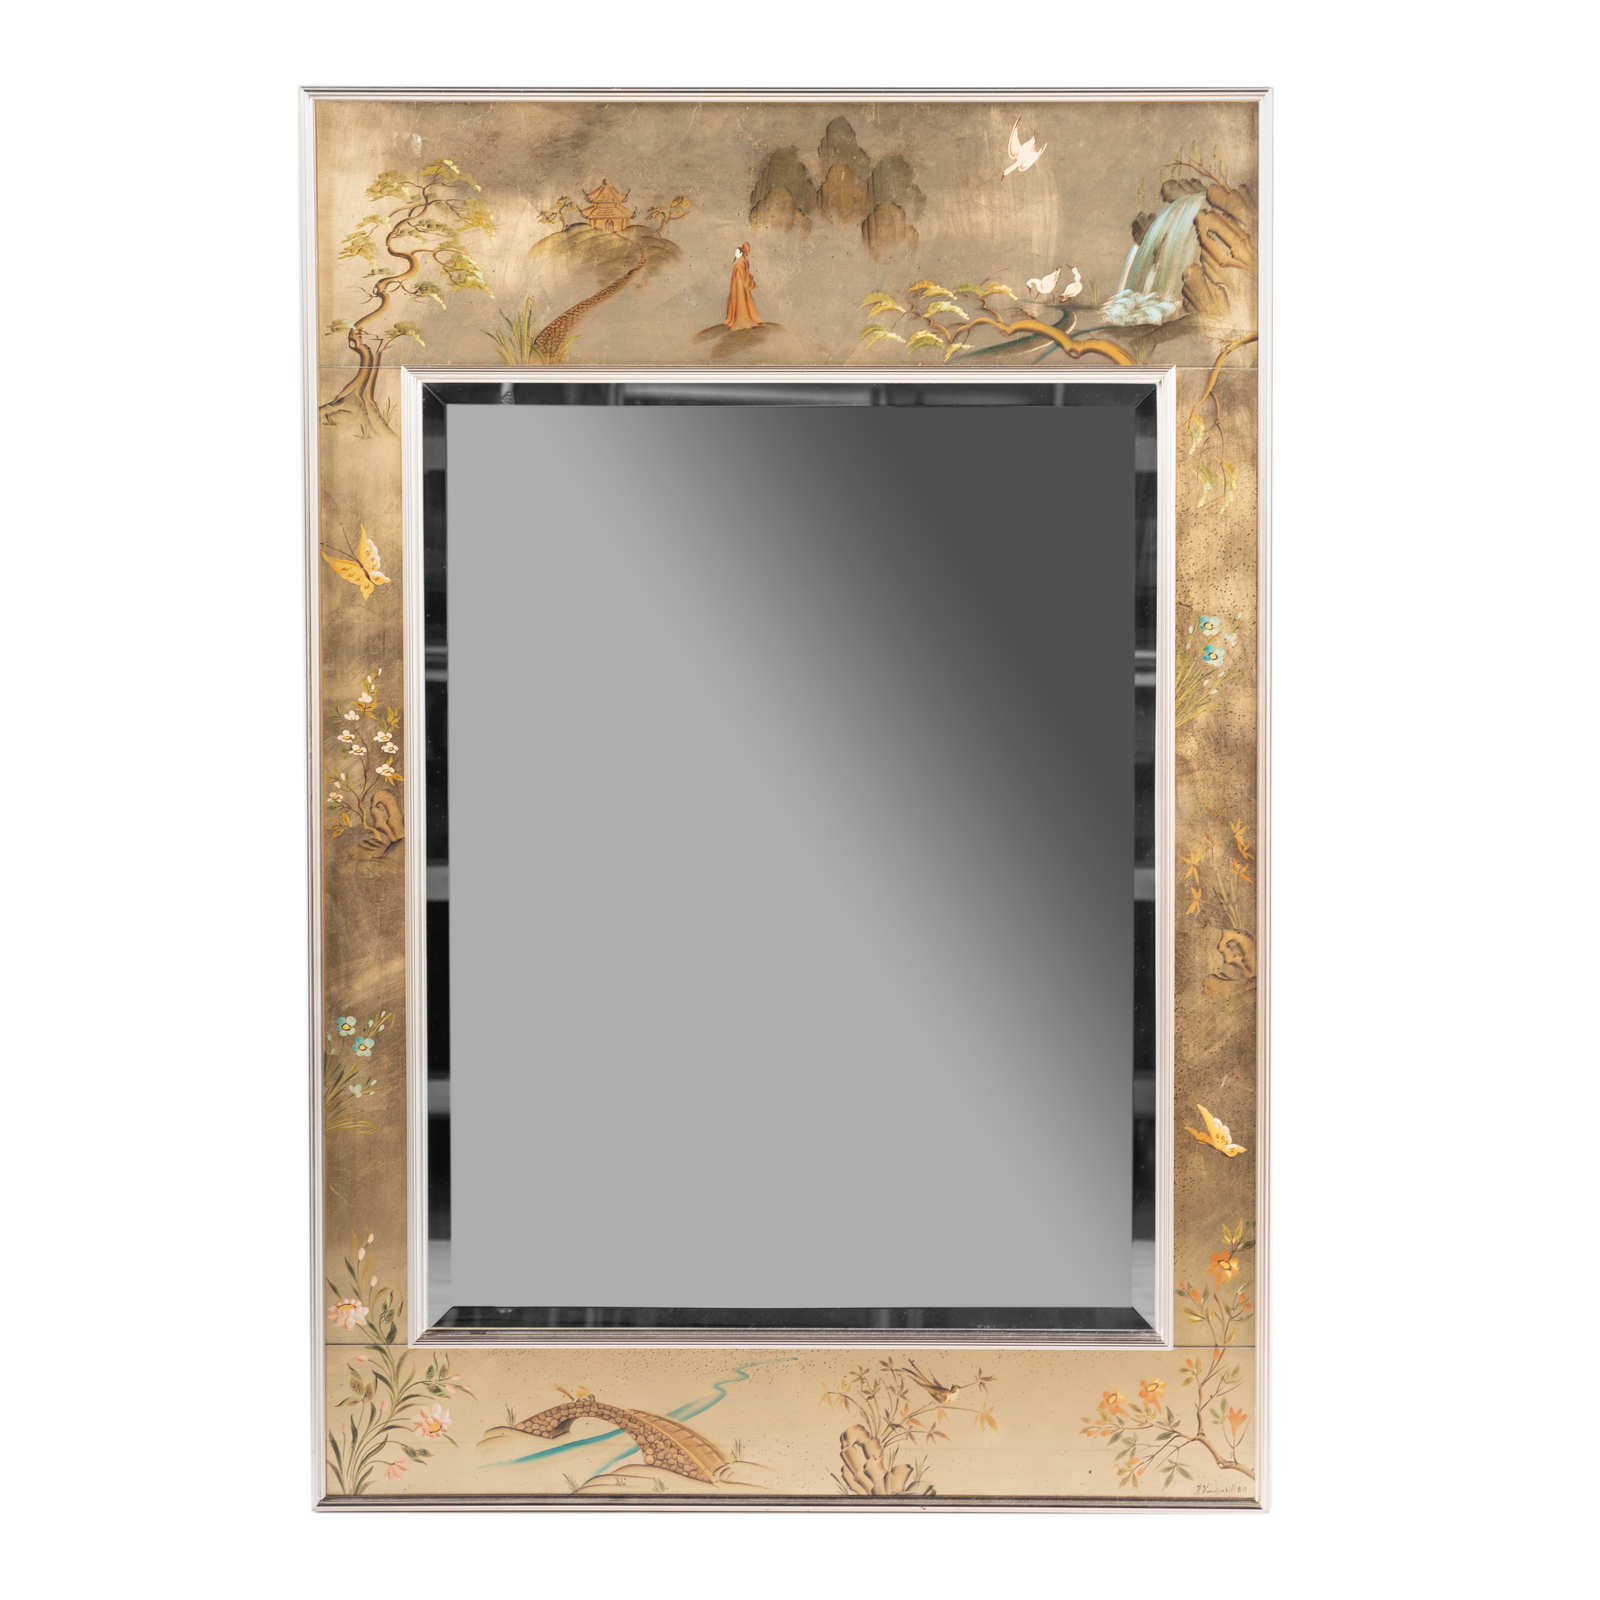 LABARGE CHINOISERIE STYLE MIRROR 369a73